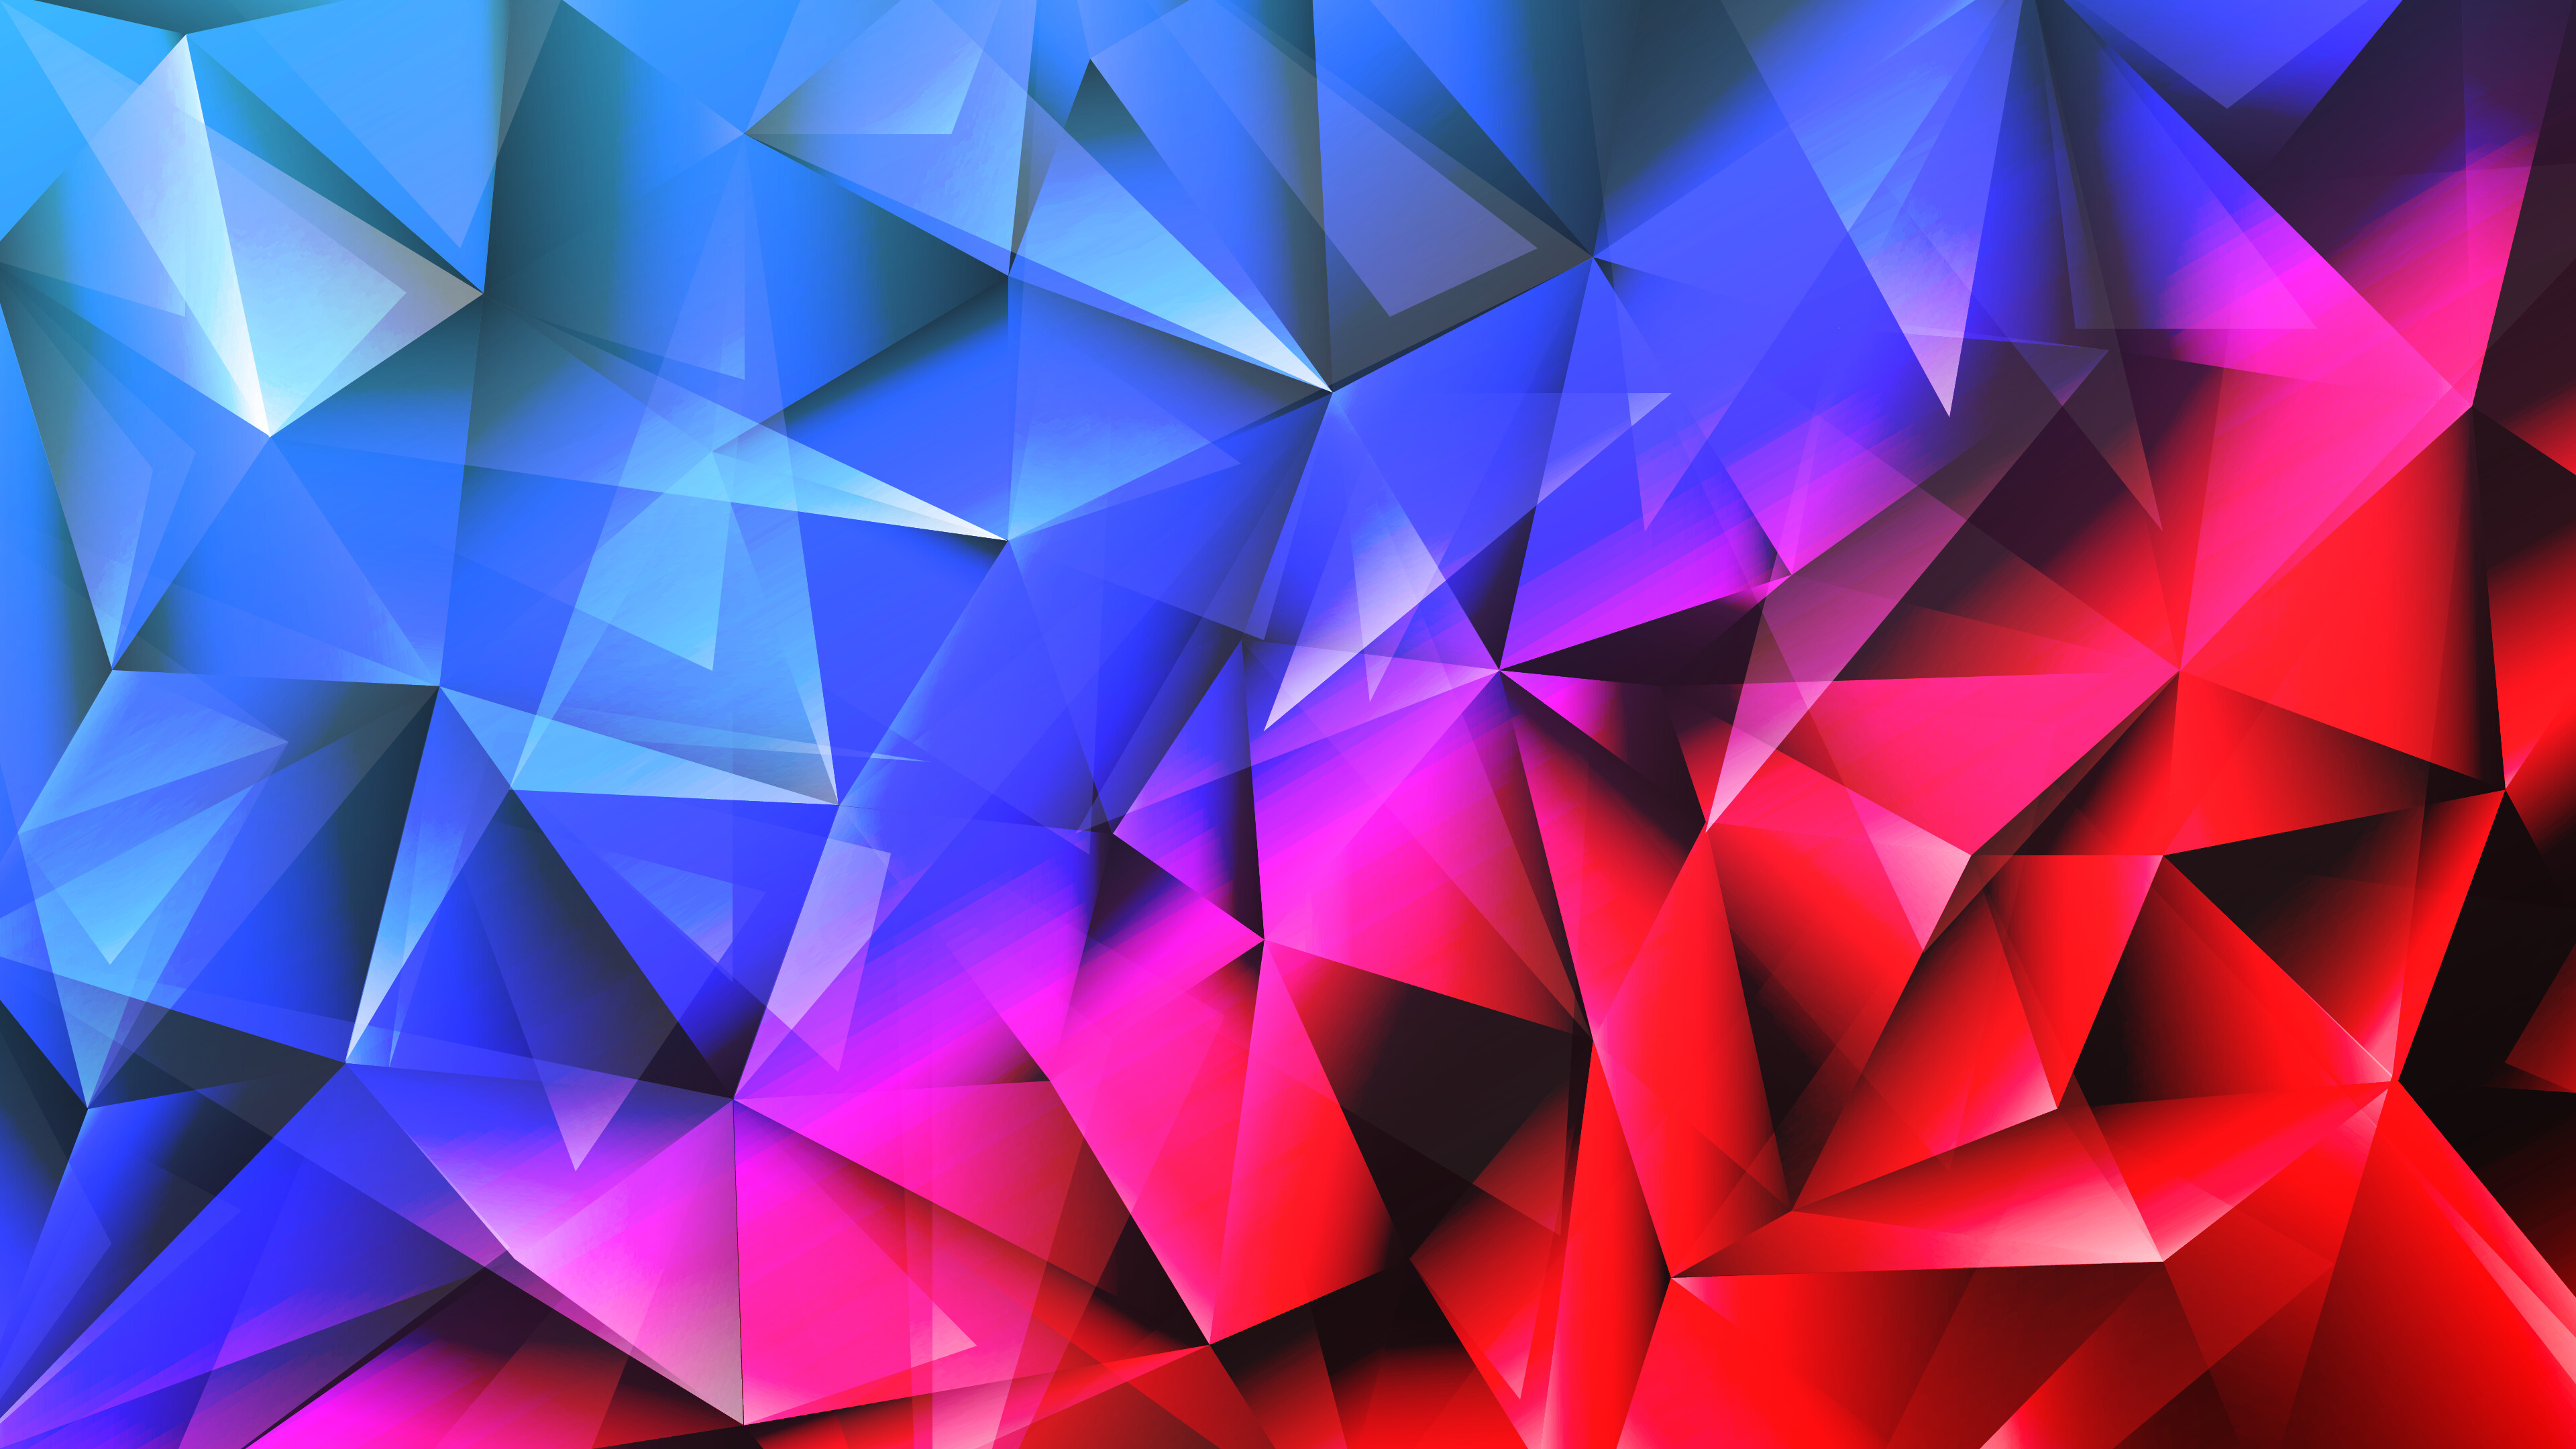 Geometric Abstract: Supplementary angles, Pyramids, Blue and red. 3840x2160 4K Wallpaper.